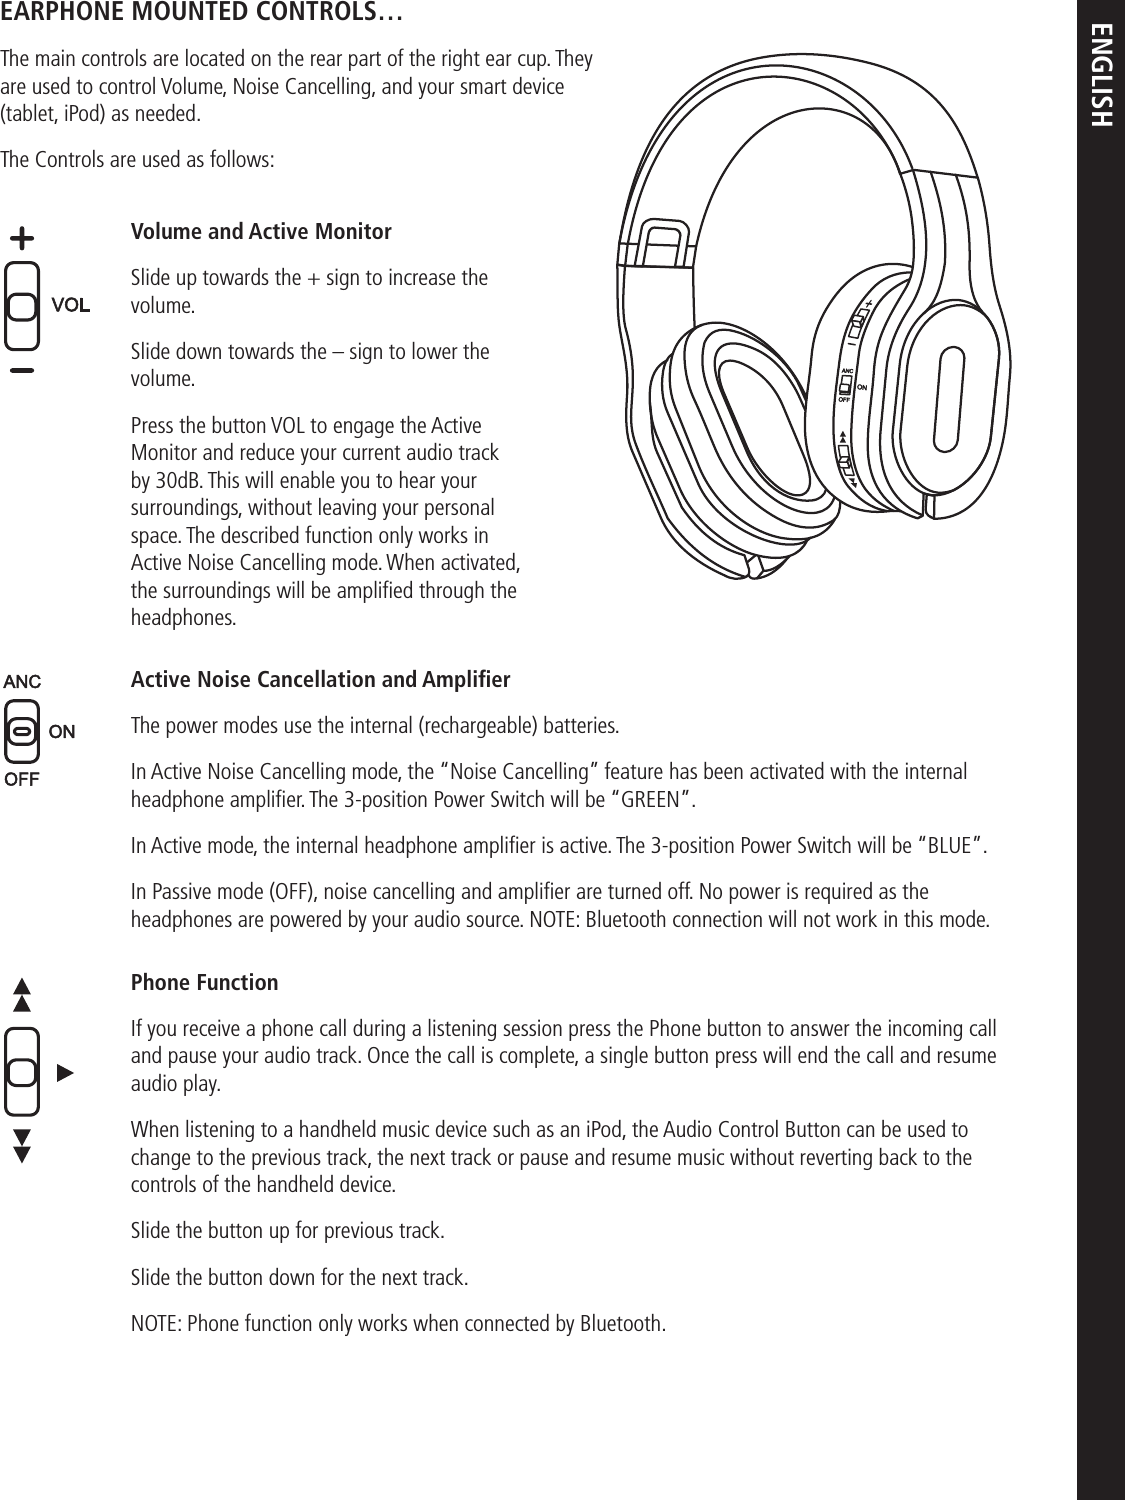 ENGLISHEARPHONE MOUNTED CONTROLS…The main controls are located on the rear part of the right ear cup. They are used to control Volume, Noise Cancelling, and your smart device (tablet, iPod) as needed.The Controls are used as follows:Volume and Active MonitorSlide up towards the + sign to increase the volume.Slide down towards the – sign to lower the volume.Press the button VOL to engage the Active Monitor and reduce your current audio track by 30dB. This will enable you to hear your surroundings, without leaving your personal space. The described function only works in Active Noise Cancelling mode. When activated, the surroundings will be ampliﬁed through the headphones. Active Noise Cancellation and AmpliﬁerThe power modes use the internal (rechargeable) batteries. In Active Noise Cancelling mode, the “Noise Cancelling” feature has been activated with the internal headphone ampliﬁer. The 3-position Power Switch will be “GREEN”.In Active mode, the internal headphone ampliﬁer is active. The 3-position Power Switch will be “BLUE”. In Passive mode (OFF), noise cancelling and ampliﬁer are turned off. No power is required as the headphones are powered by your audio source. NOTE: Bluetooth connection will not work in this mode.Phone FunctionIf you receive a phone call during a listening session press the Phone button to answer the incoming call and pause your audio track. Once the call is complete, a single button press will end the call and resume audio play.When listening to a handheld music device such as an iPod, the Audio Control Button can be used to change to the previous track, the next track or pause and resume music without reverting back to the controls of the handheld device.Slide the button up for previous track. Slide the button down for the next track.NOTE: Phone function only works when connected by Bluetooth.